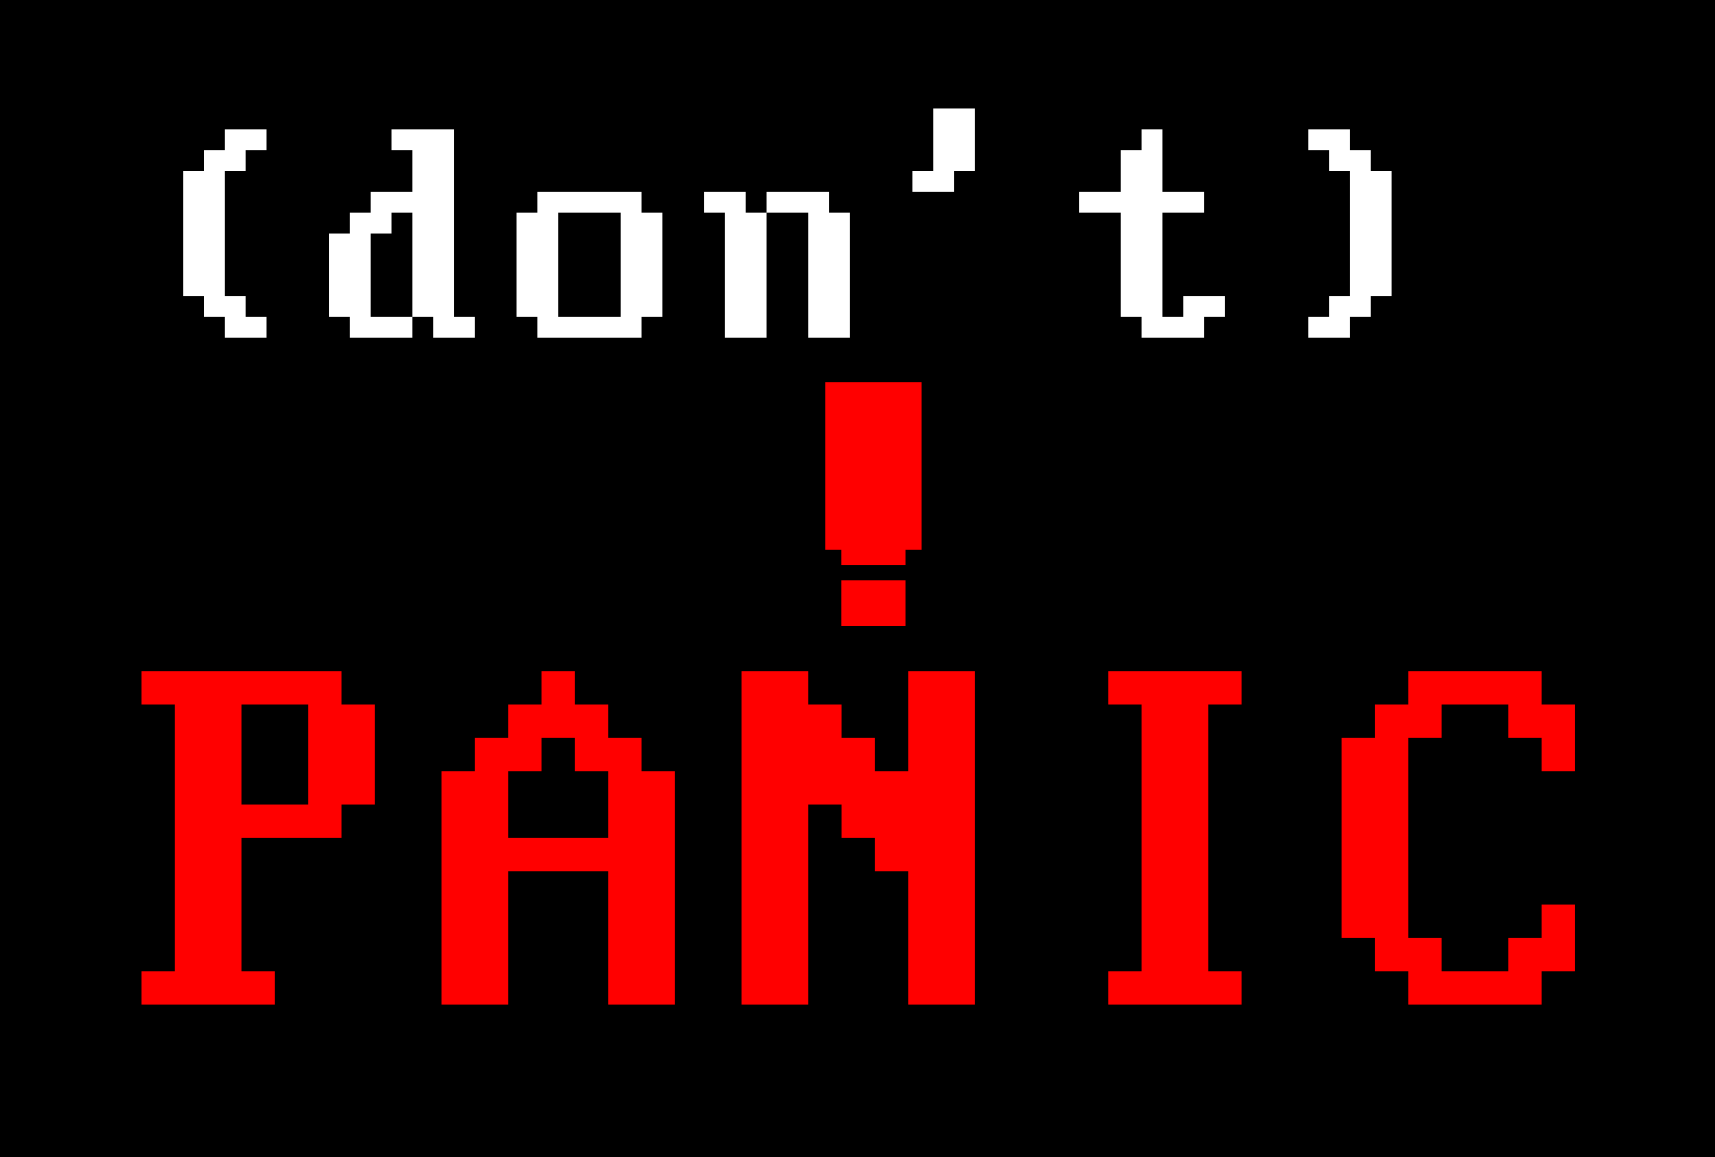 (don't) PANIC! by HardEggGames for GMTK Game Jam 2020 - itch.io